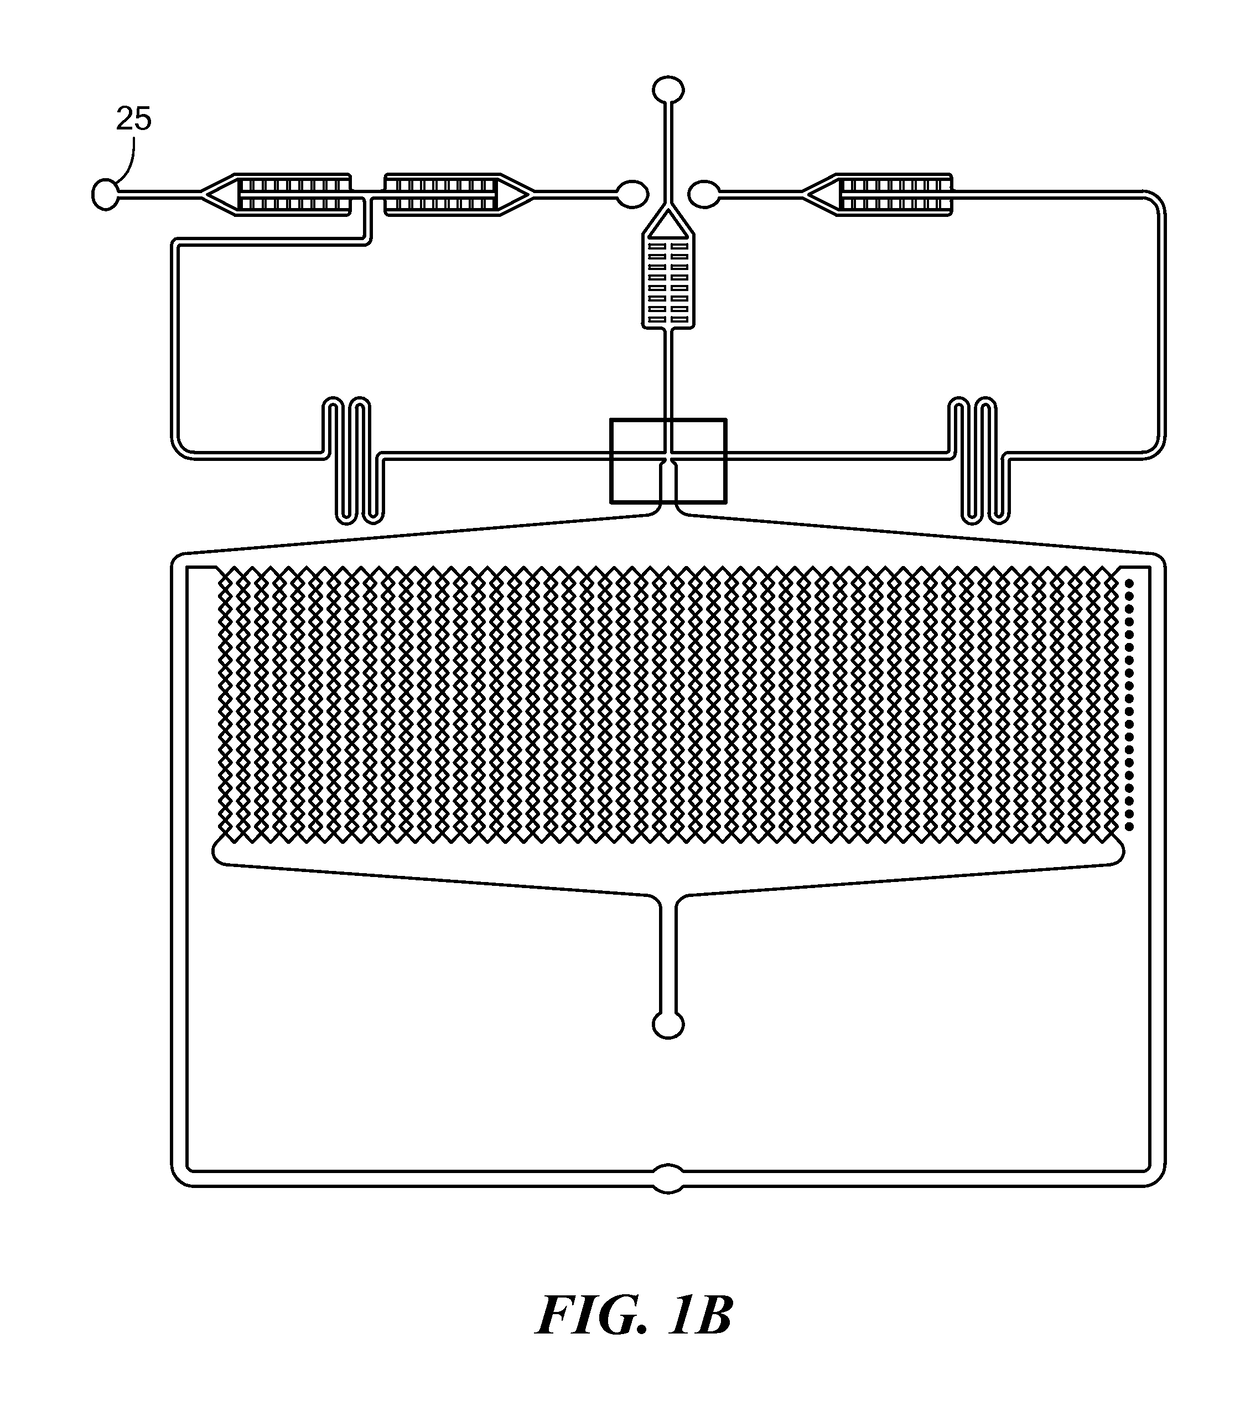 Microfluidic Device and Method for Analysis of Tumor Cell Microenvironments